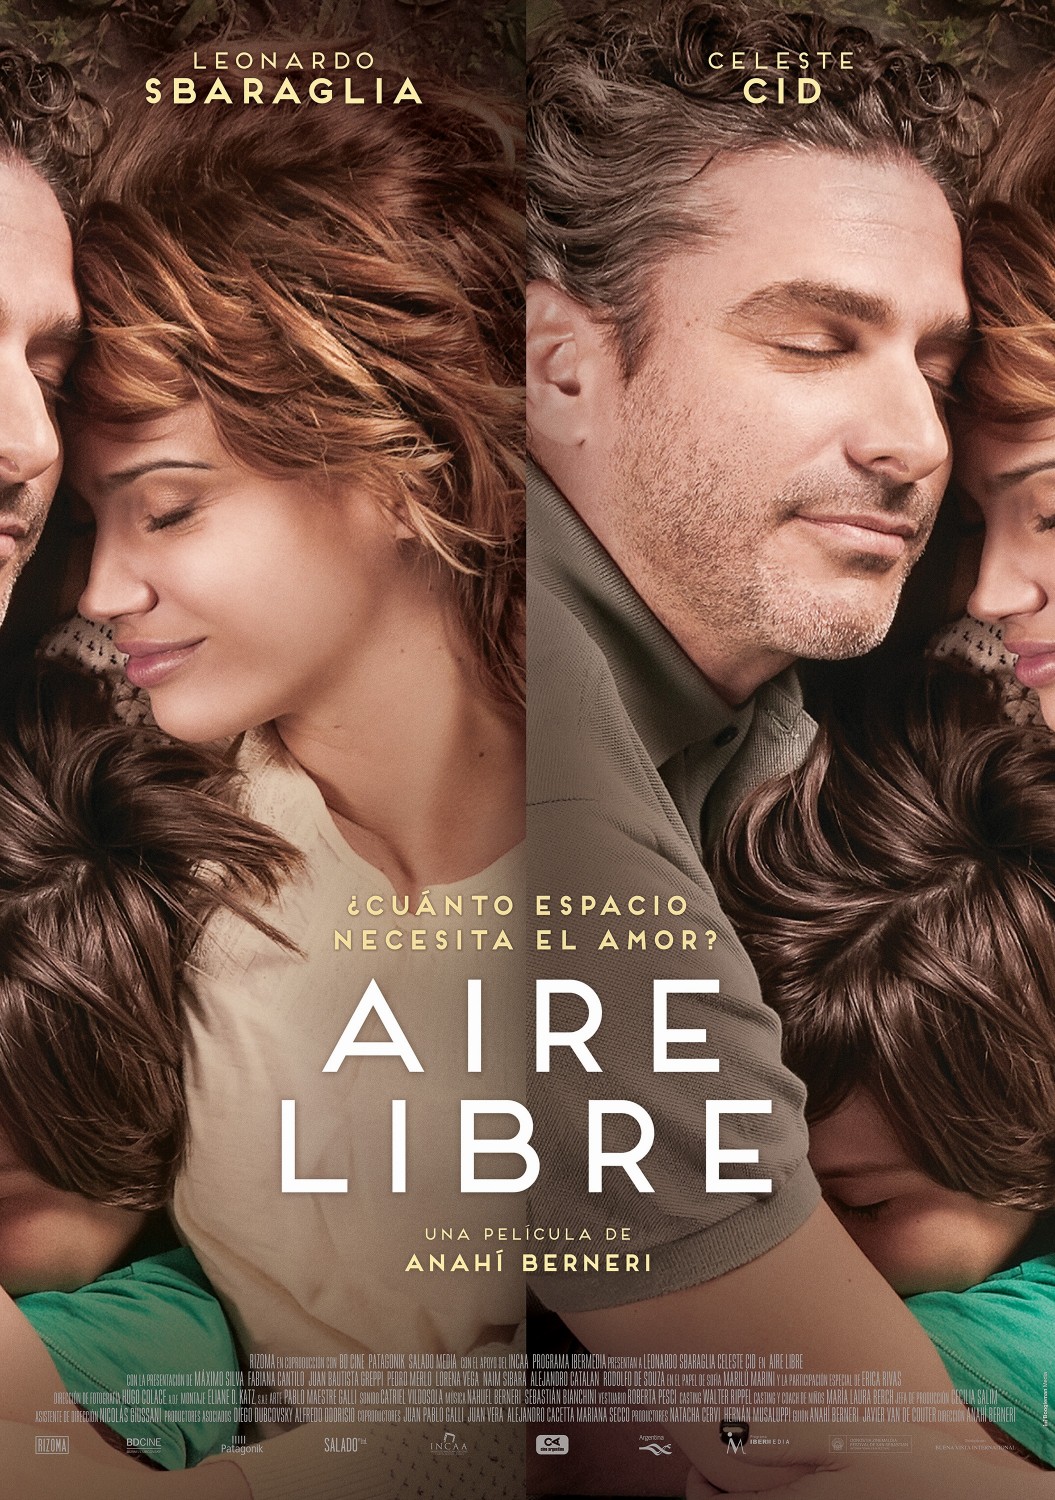 Extra Large Movie Poster Image for Aire libre 